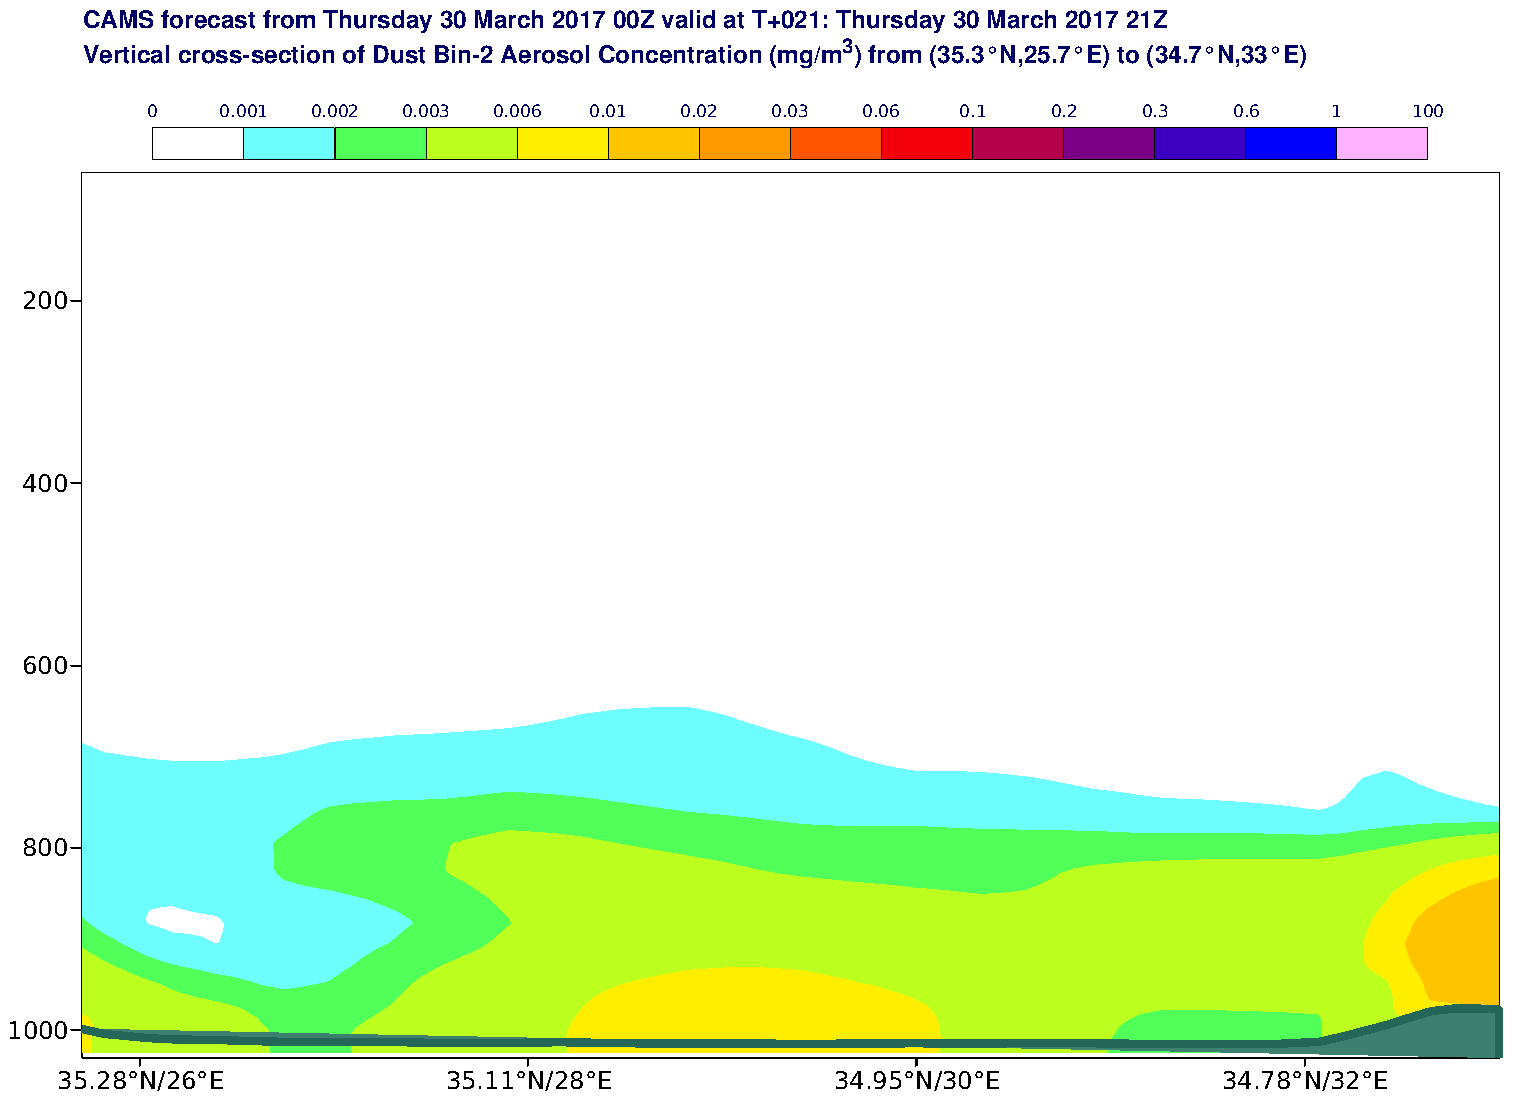 Vertical cross-section of Dust Bin-2 Aerosol Concentration (mg/m3) valid at T21 - 2017-03-30 21:00